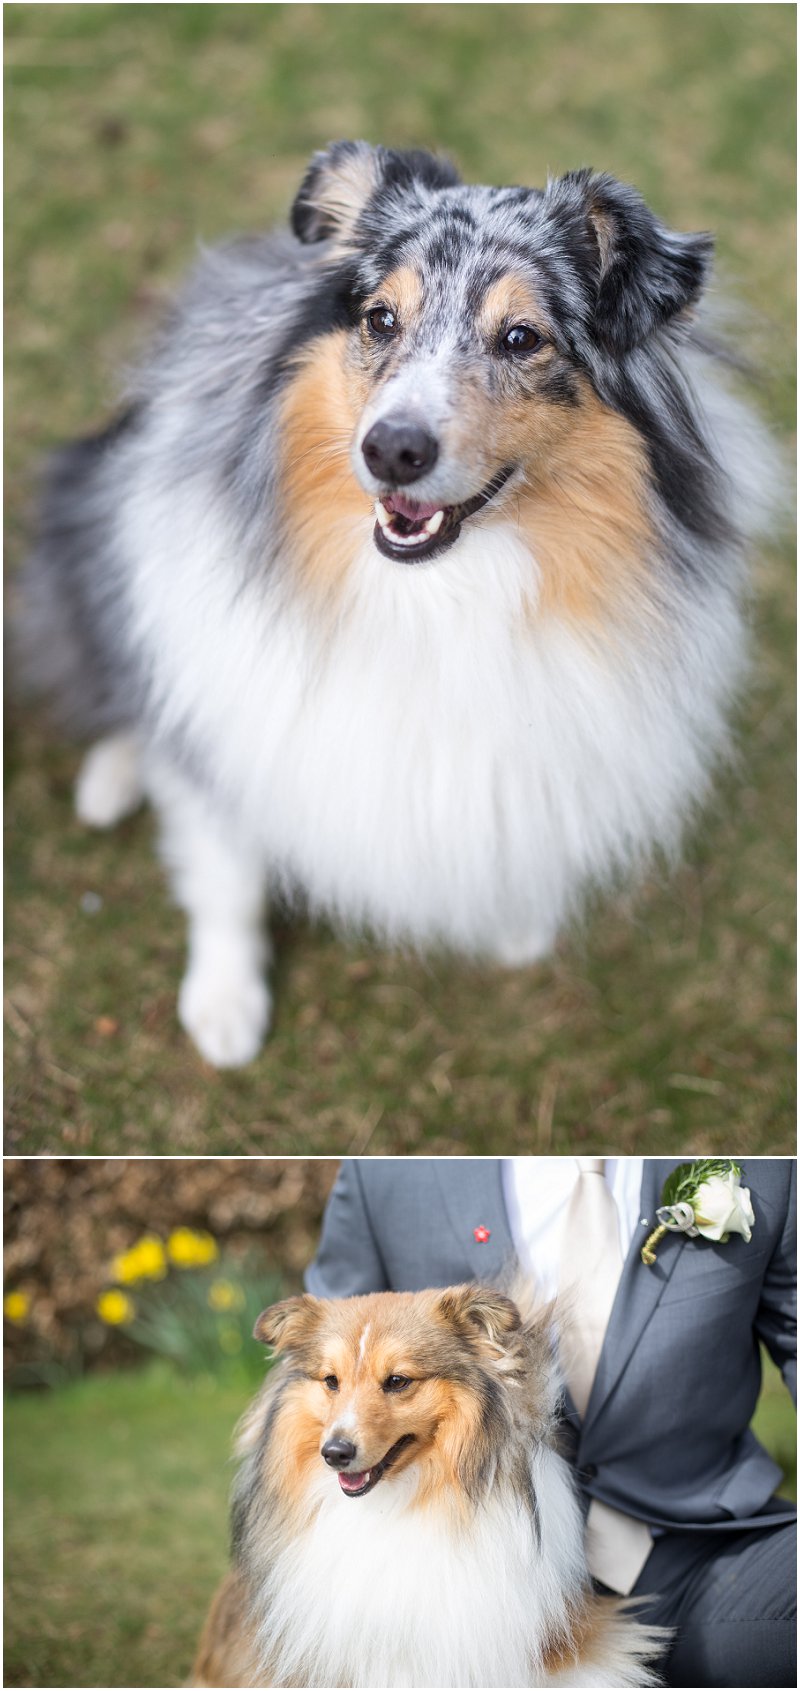 Bride and Groom's babies - sheltie dogs